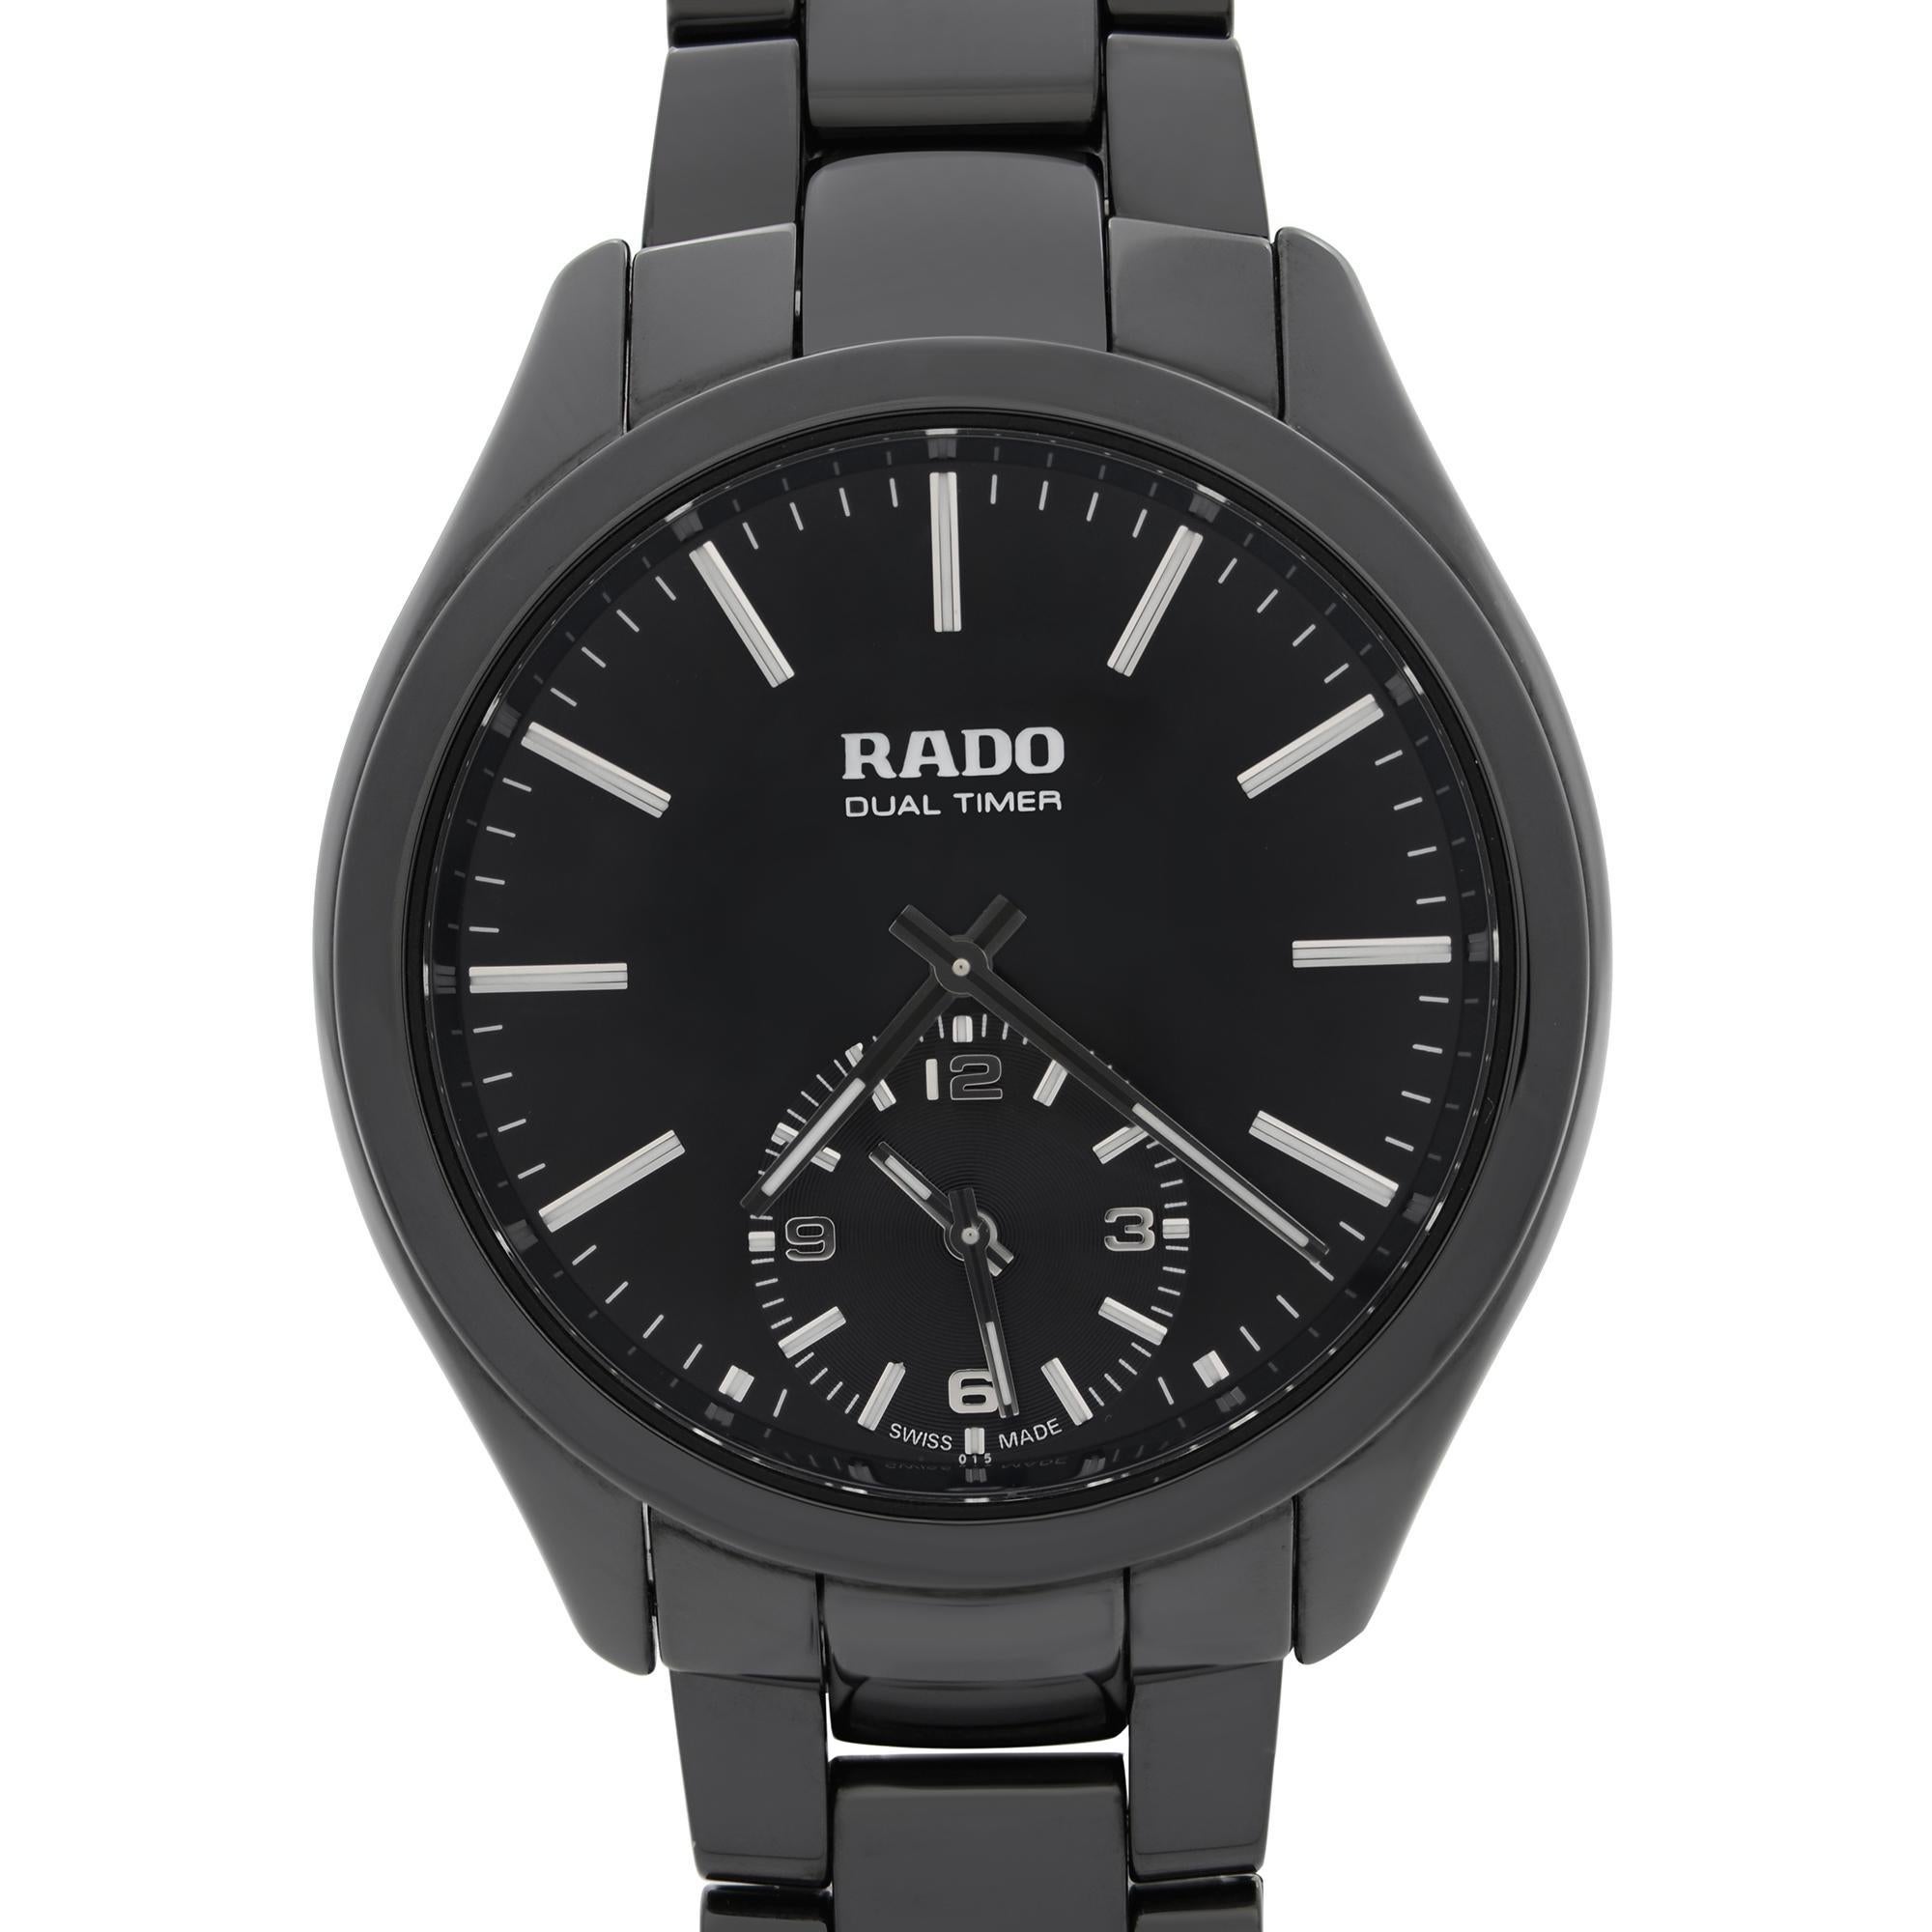 New with Defects Rado Hyperchrome Dual Timer XL Touch Black Ceramic Men's Watch R32114152. The Watch has a little scratch at the edge of the case back due to replacing the battery. This Beautiful Men's Timepiece is Powered by a Quartz (Battery)